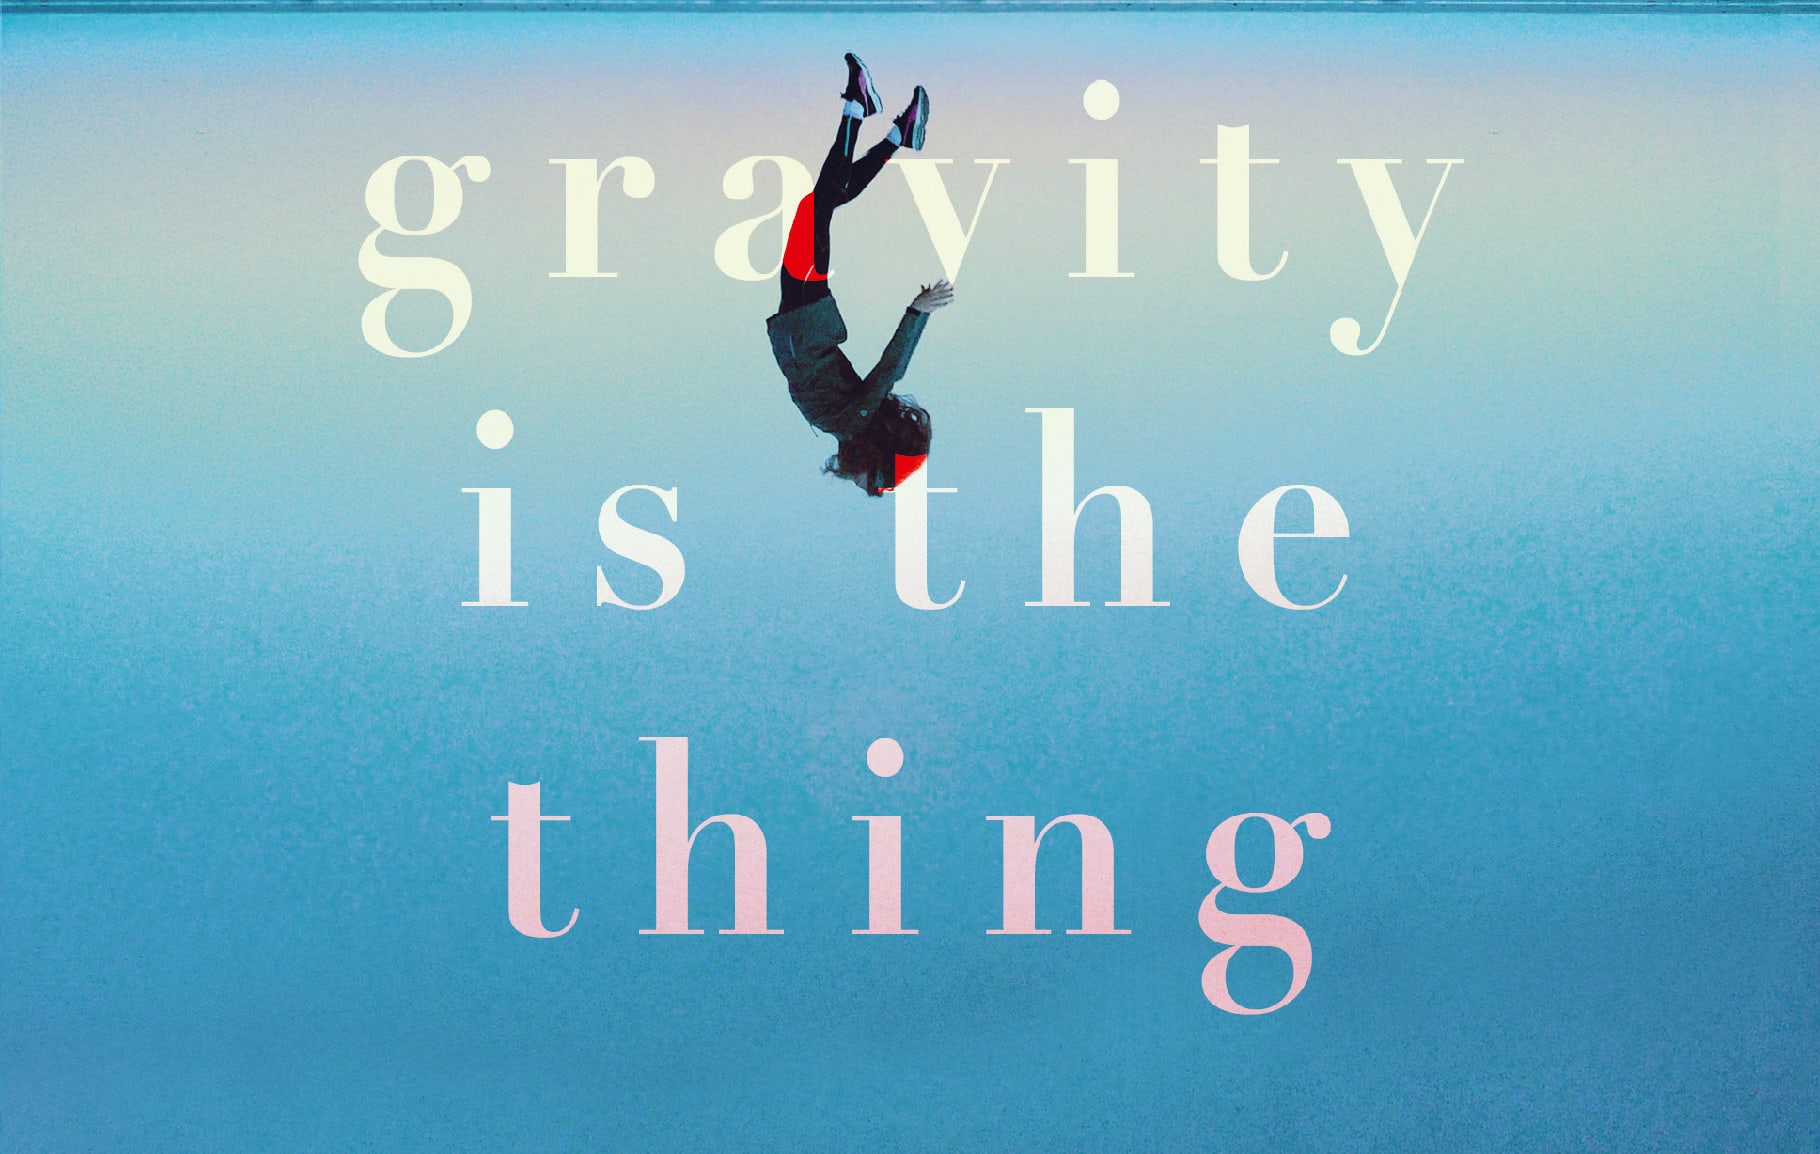 Gravity is the Thing by Jaclyn Moriarty